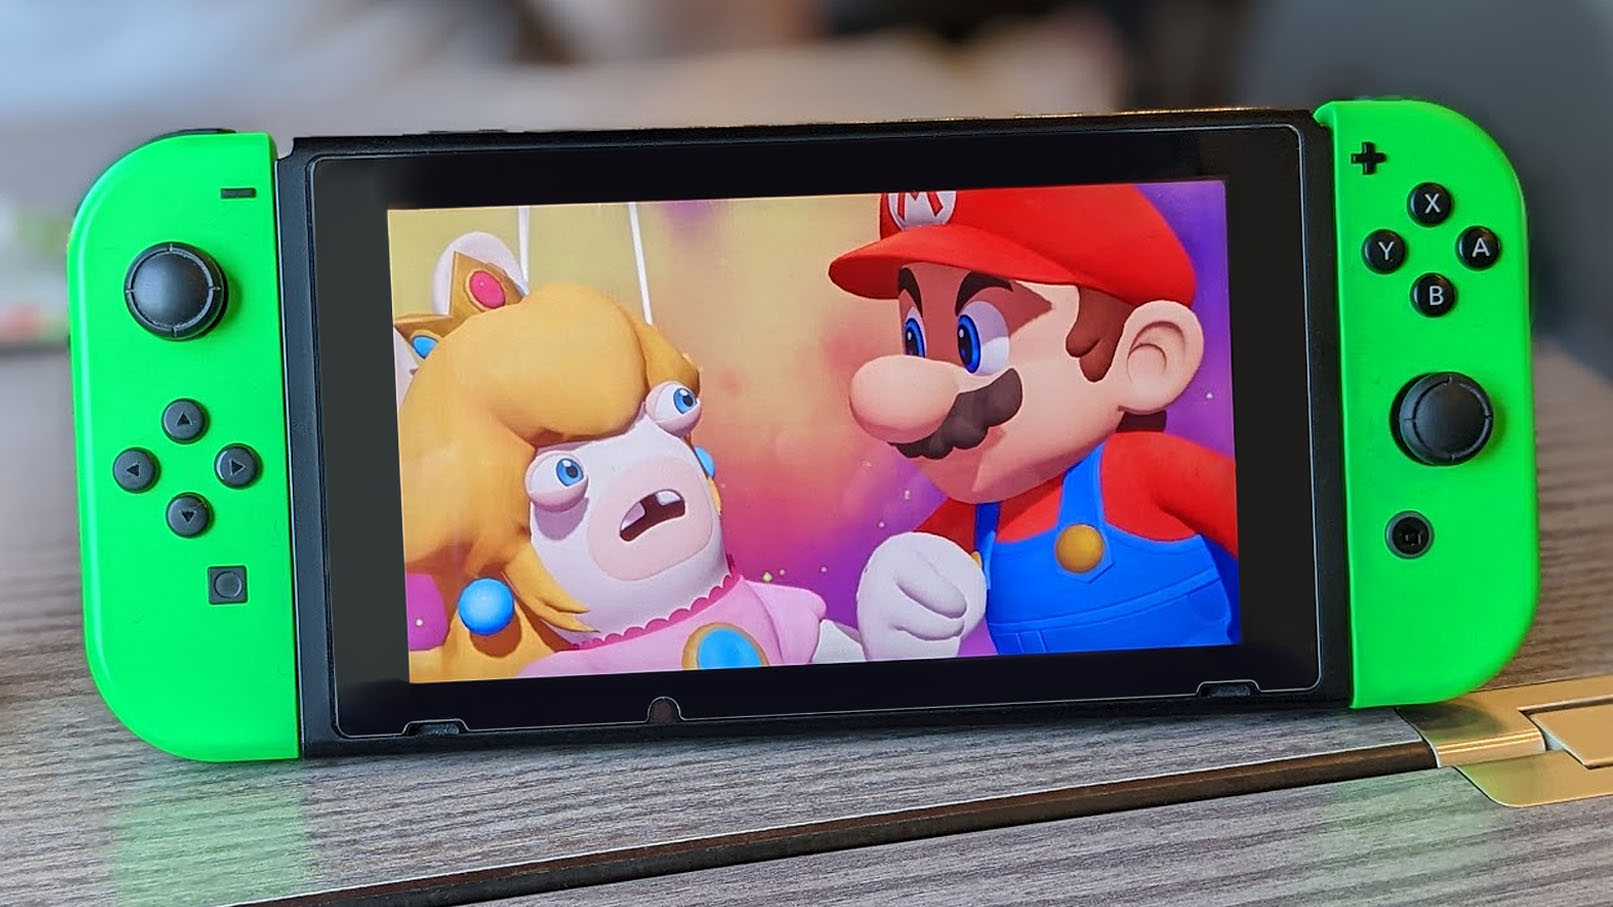 Mario + Rabbids: Sparks of Hope Coming to Switch in 2022